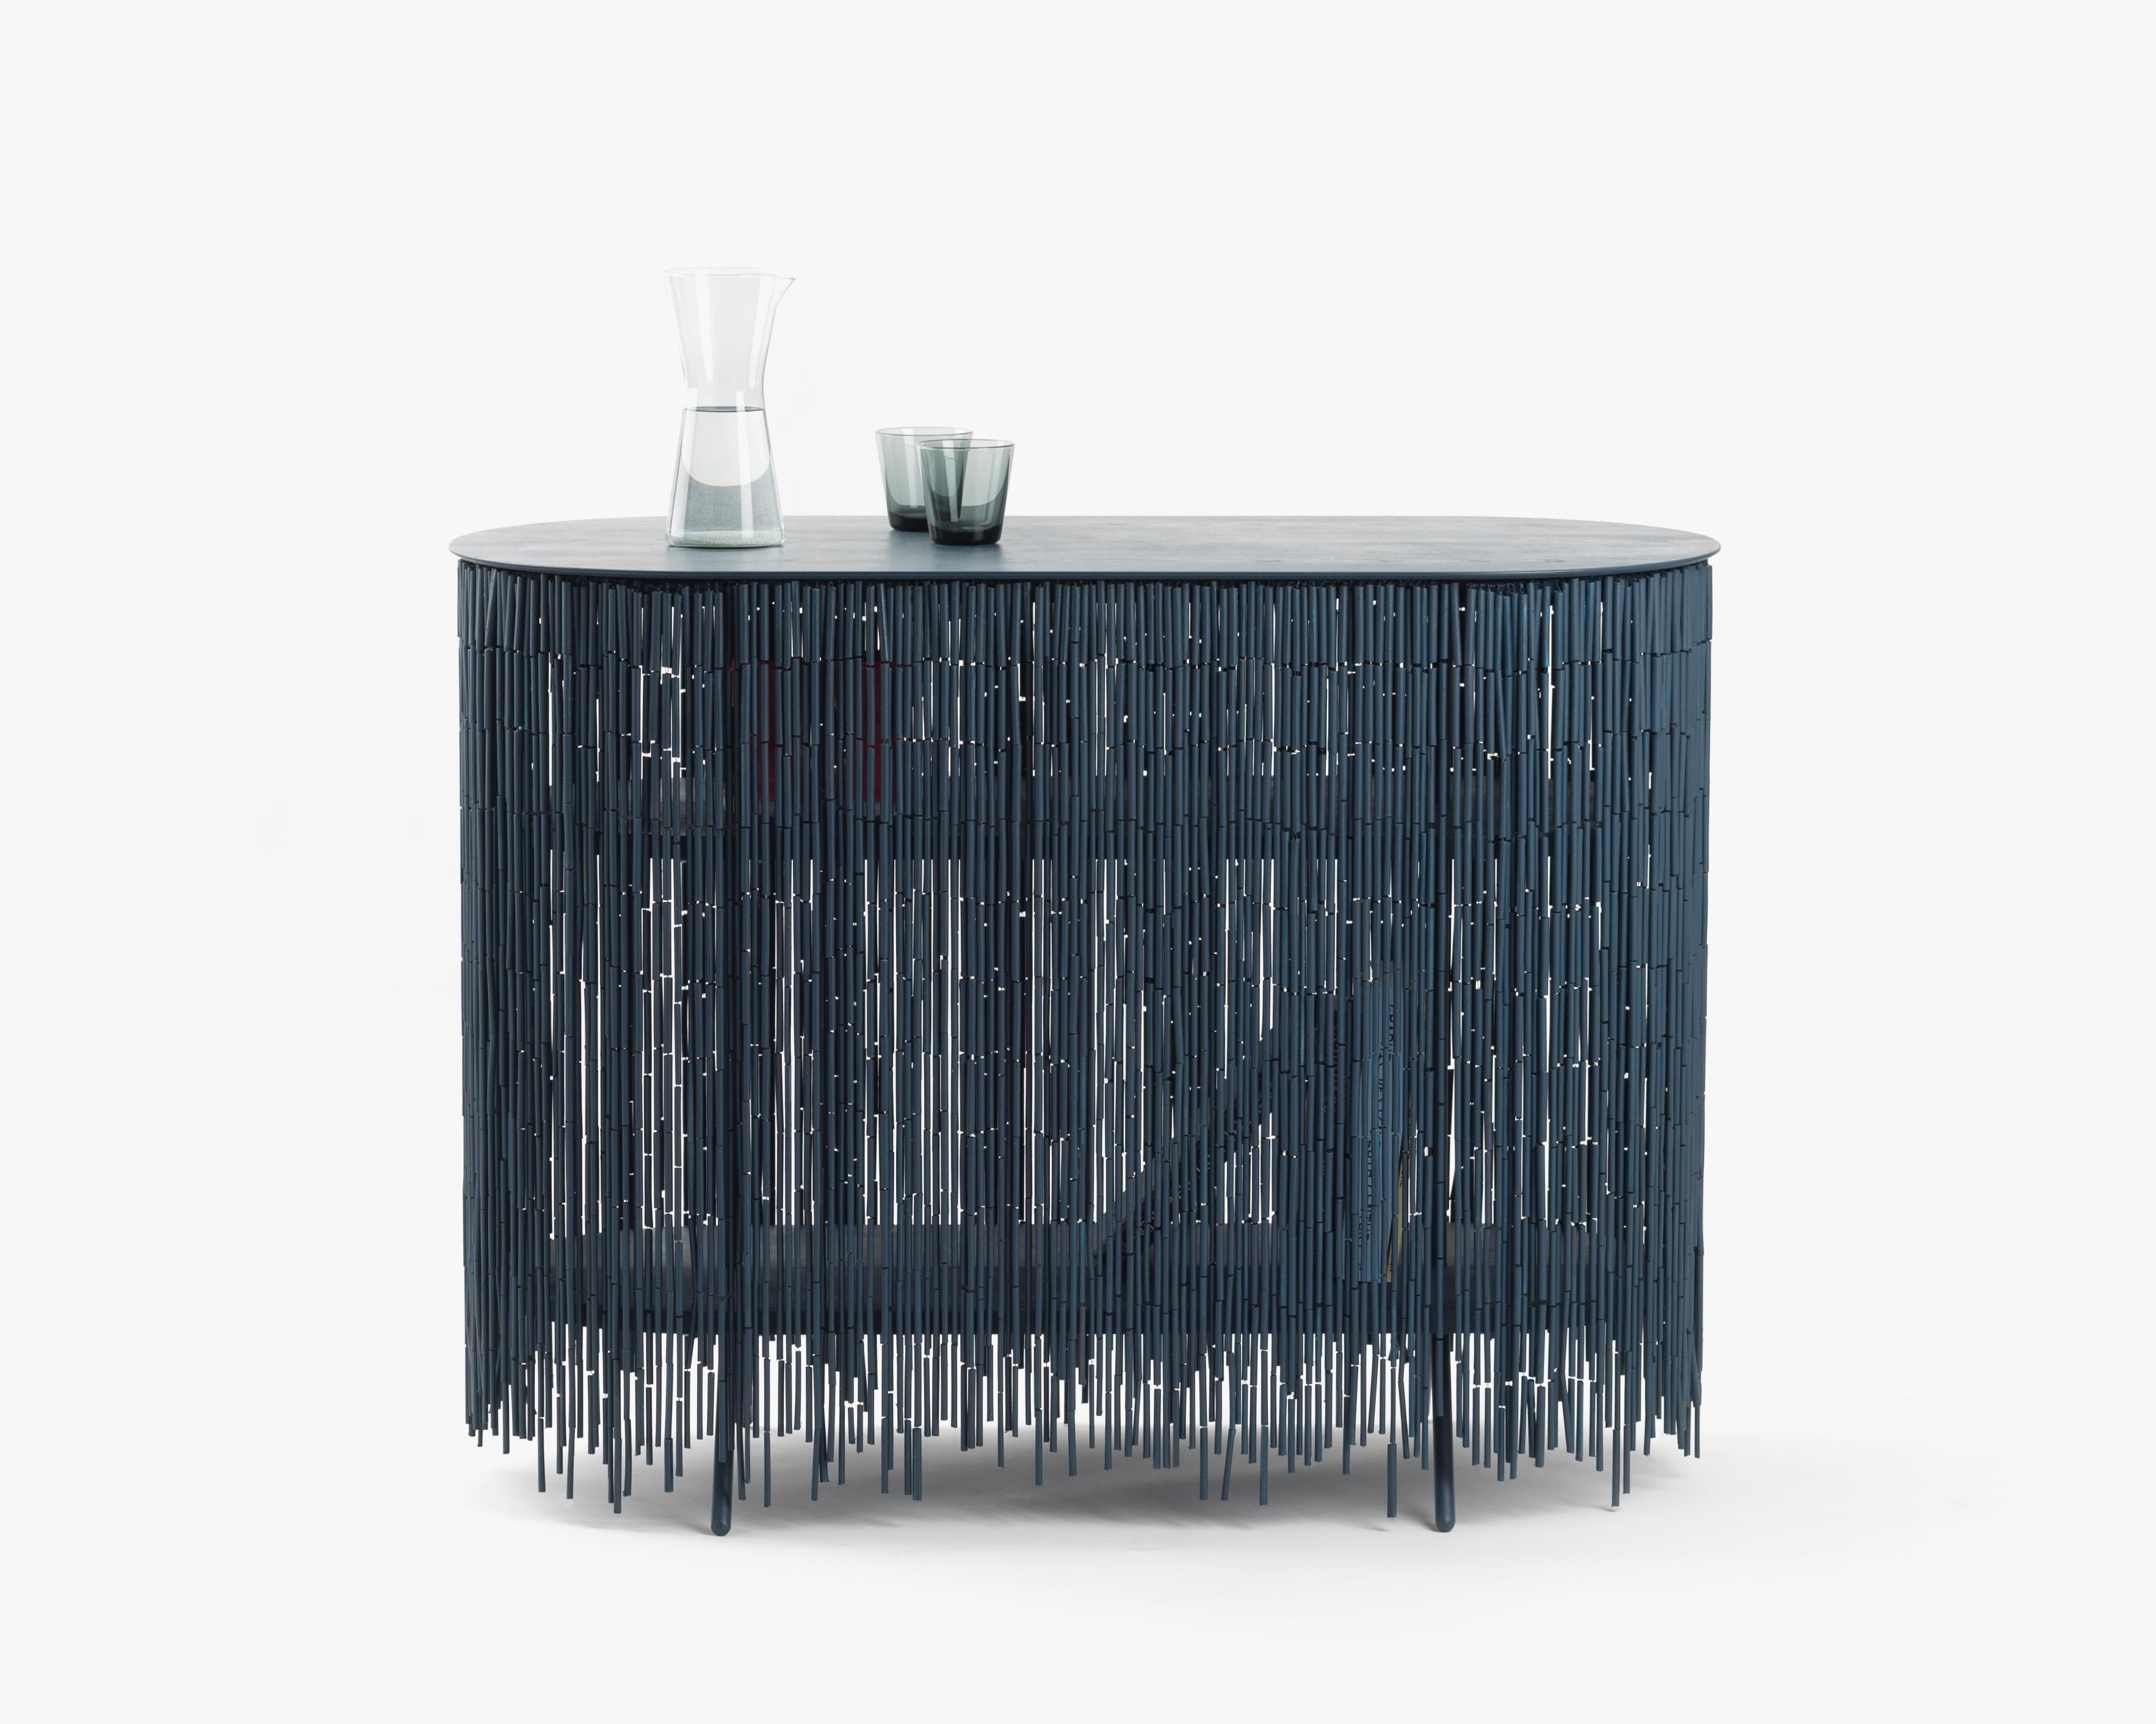 Keefer is a credenza that alludes to the objects stored within its shelves, yet obscures their identity through its bamboo-beaded skirt. The skirt masks the vertical supports, creating the illusion of floating shelves. The interior can be accessed